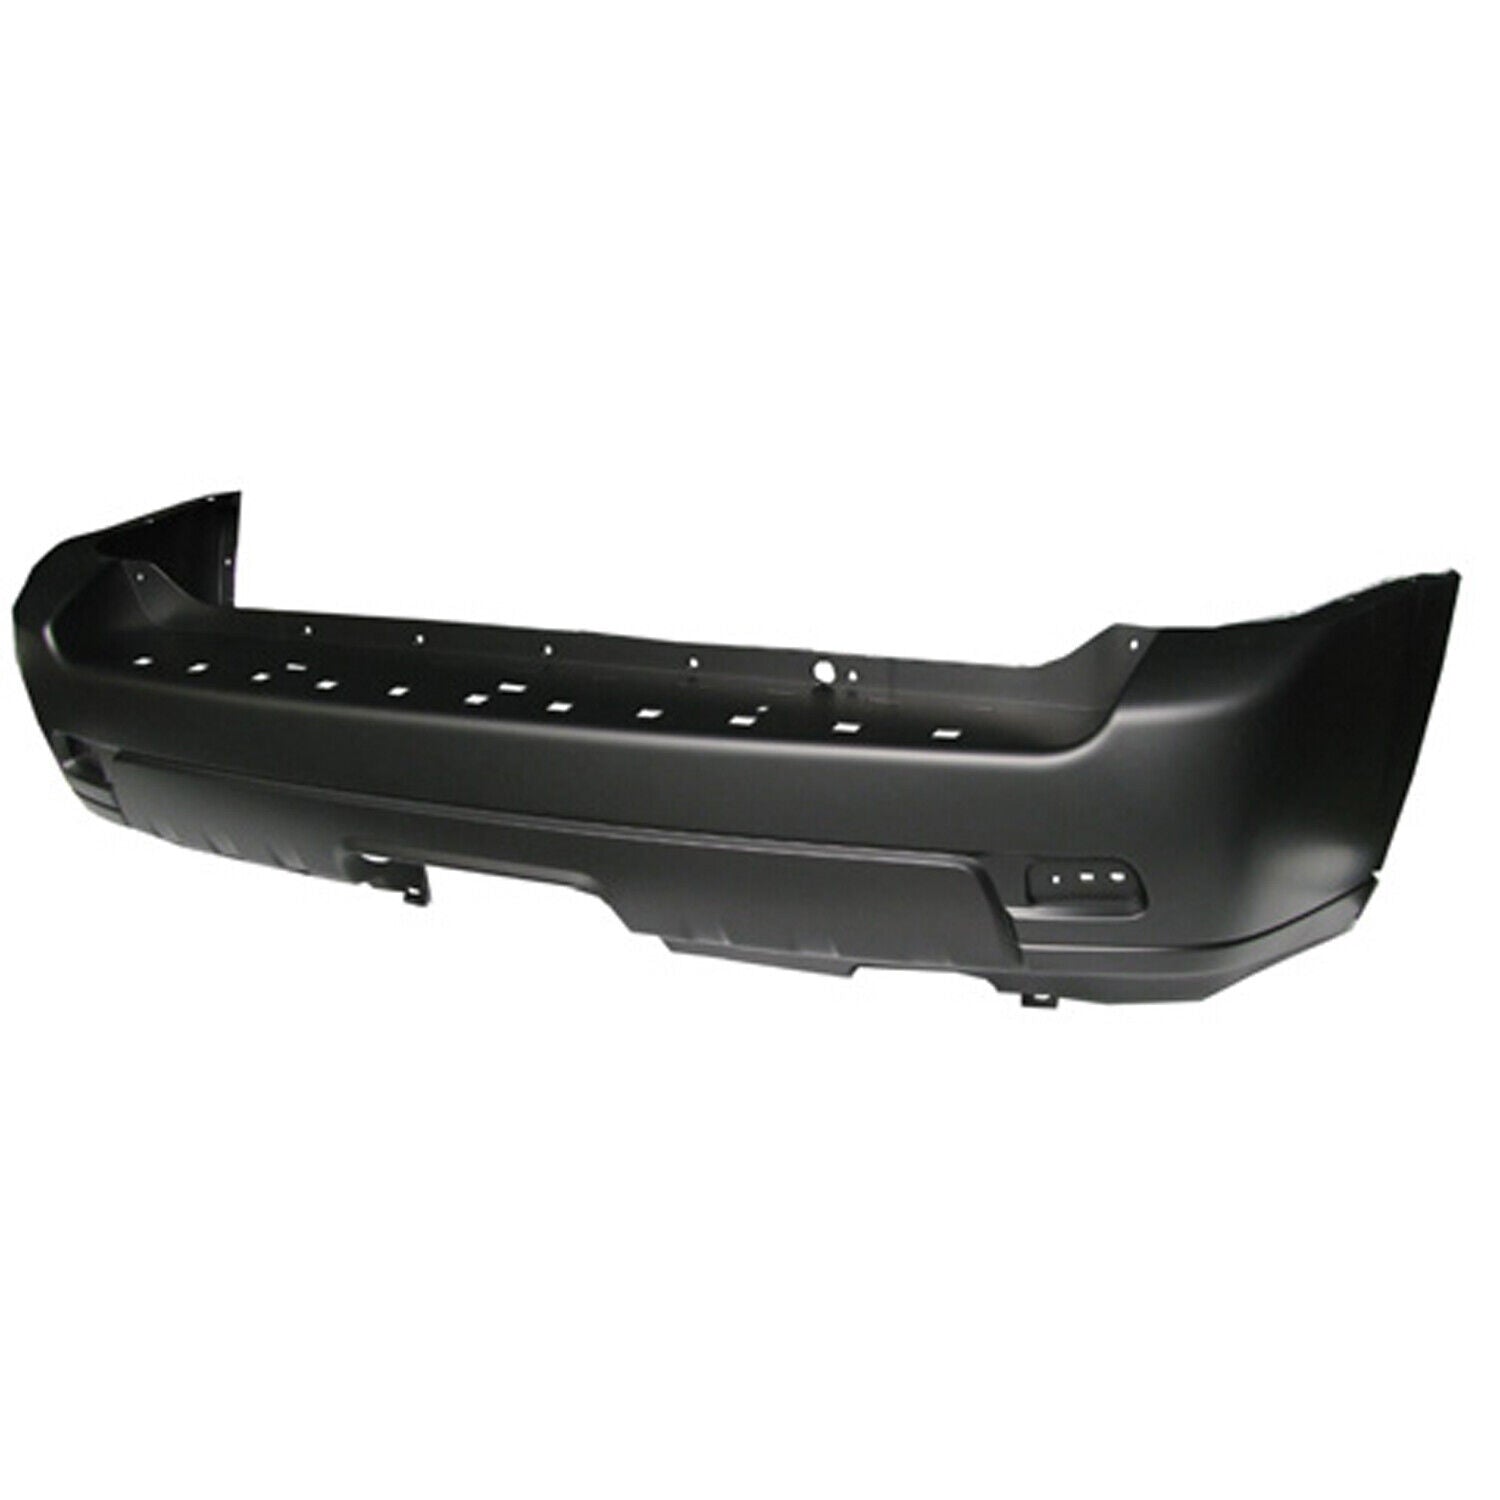 2006-2009 CHEVY TRAILBLAZER; Rear Bumper Cover; LS/LT Painted to Match